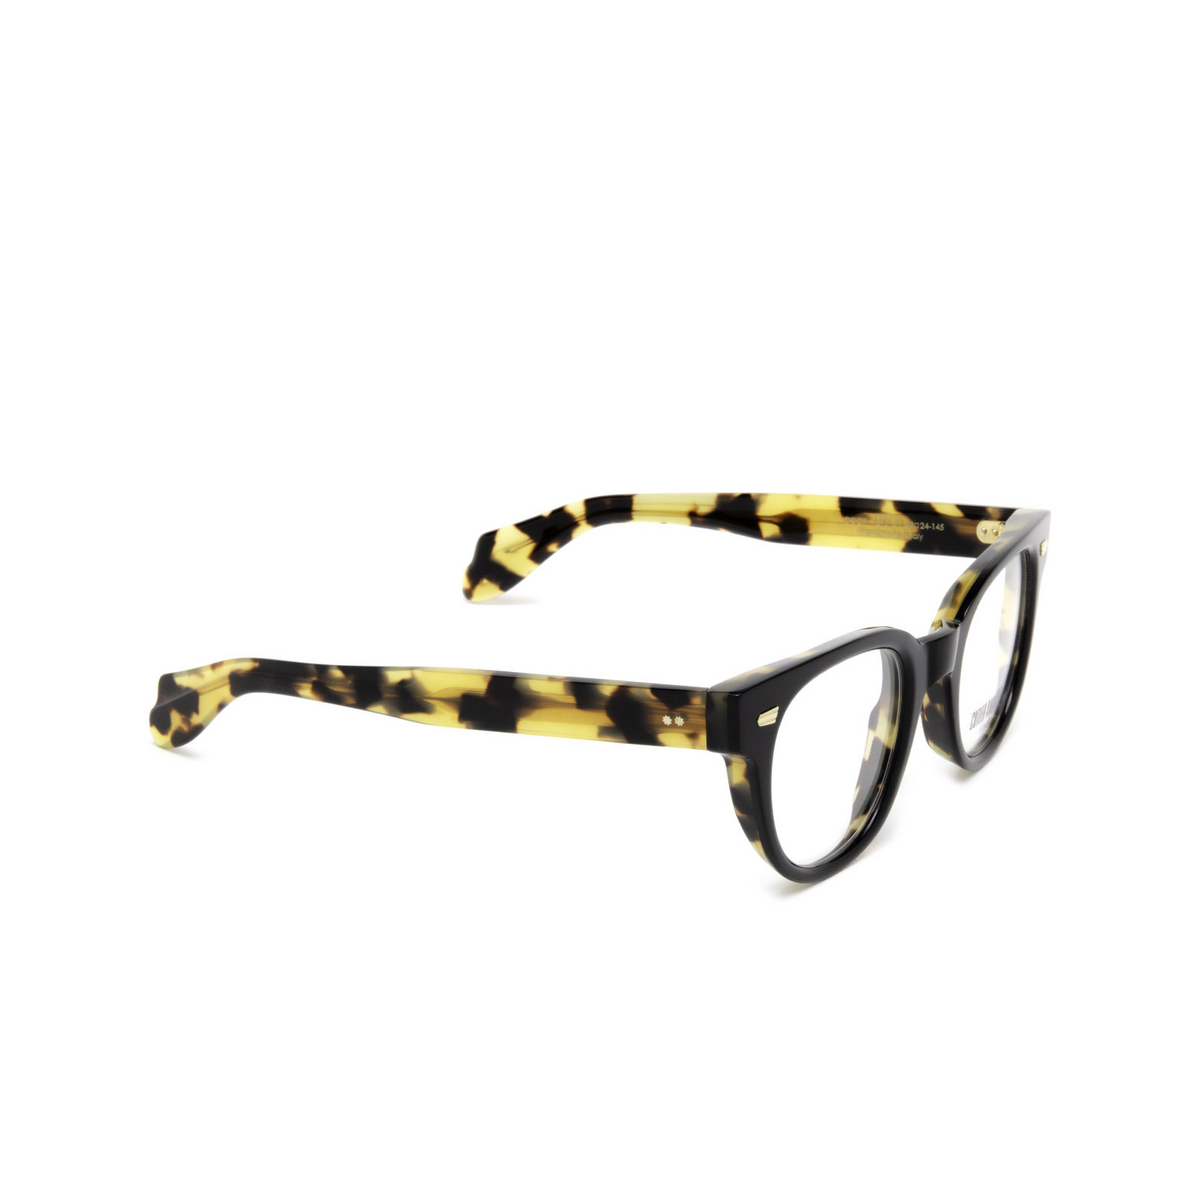 Cutler and Gross® Round Eyeglasses: 1392 color Black On Camo 01 - three-quarters view.